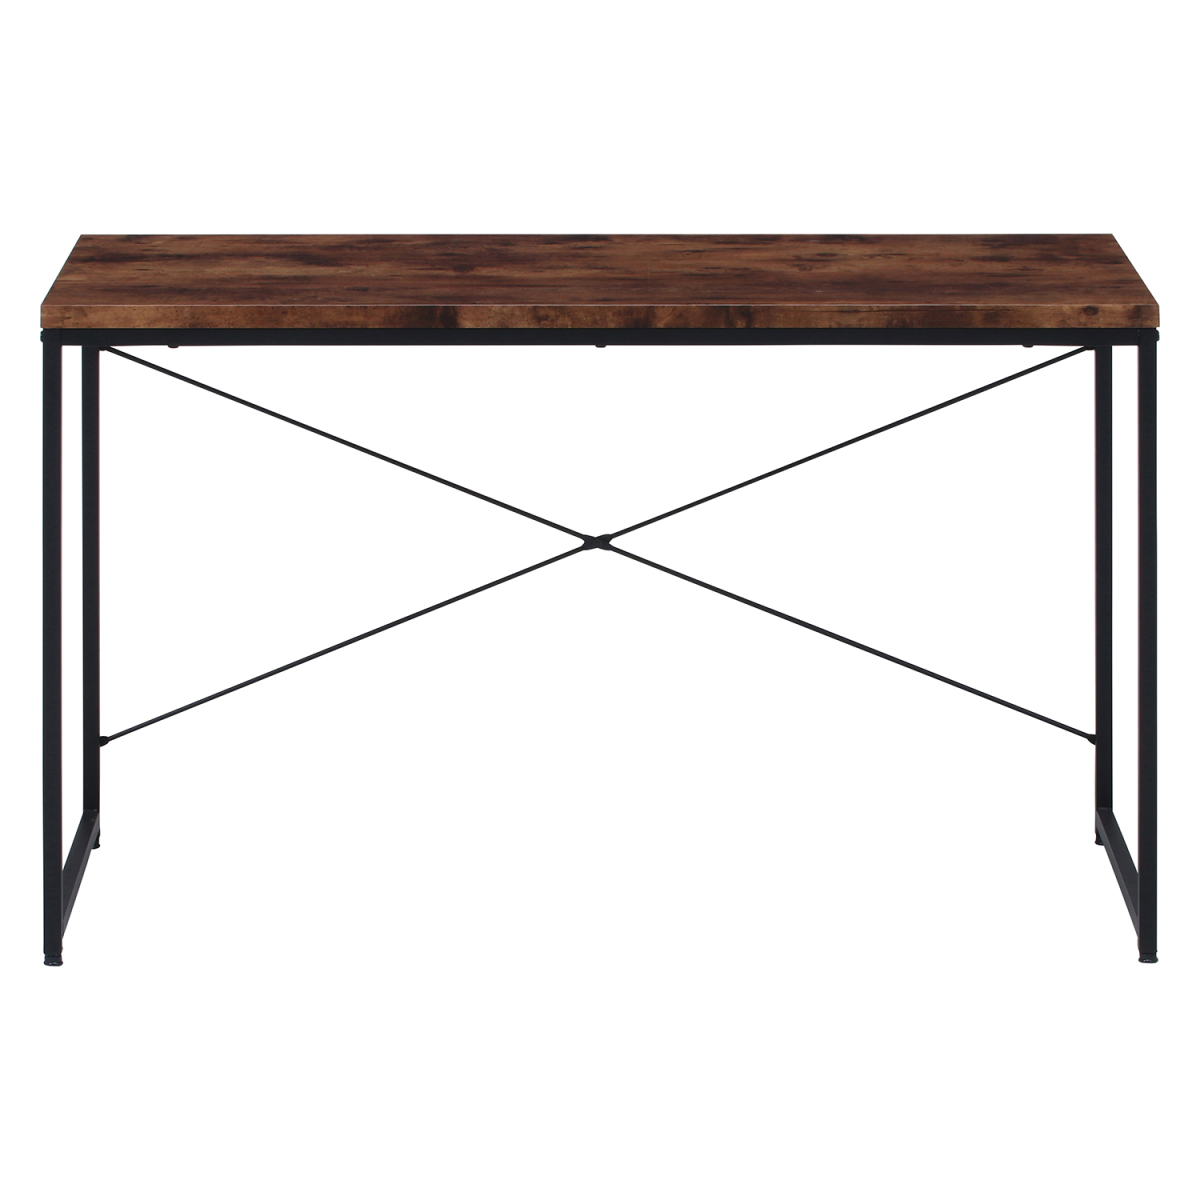  Work desk wide table width 120cm depth 55cm Brown [ new goods ][ free shipping ( one part region excepting )]